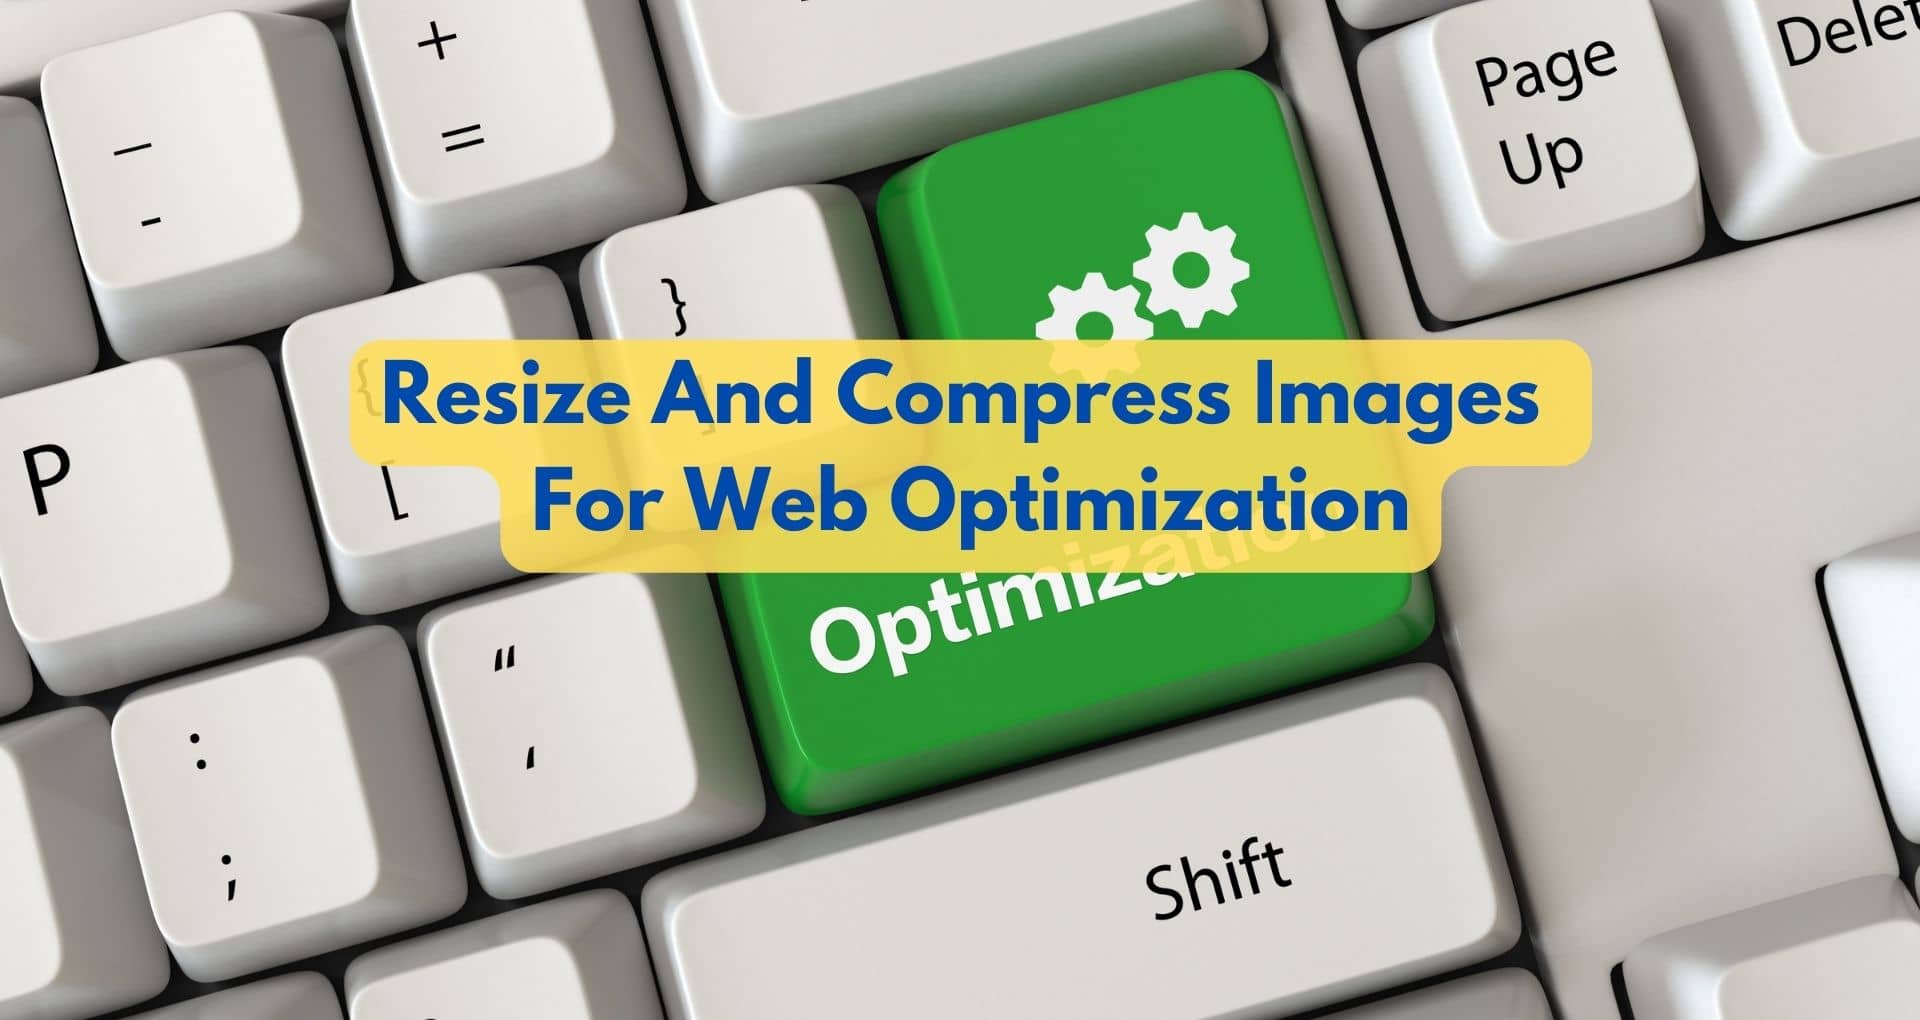 How To Resize And Compress Images For Web Optimization?